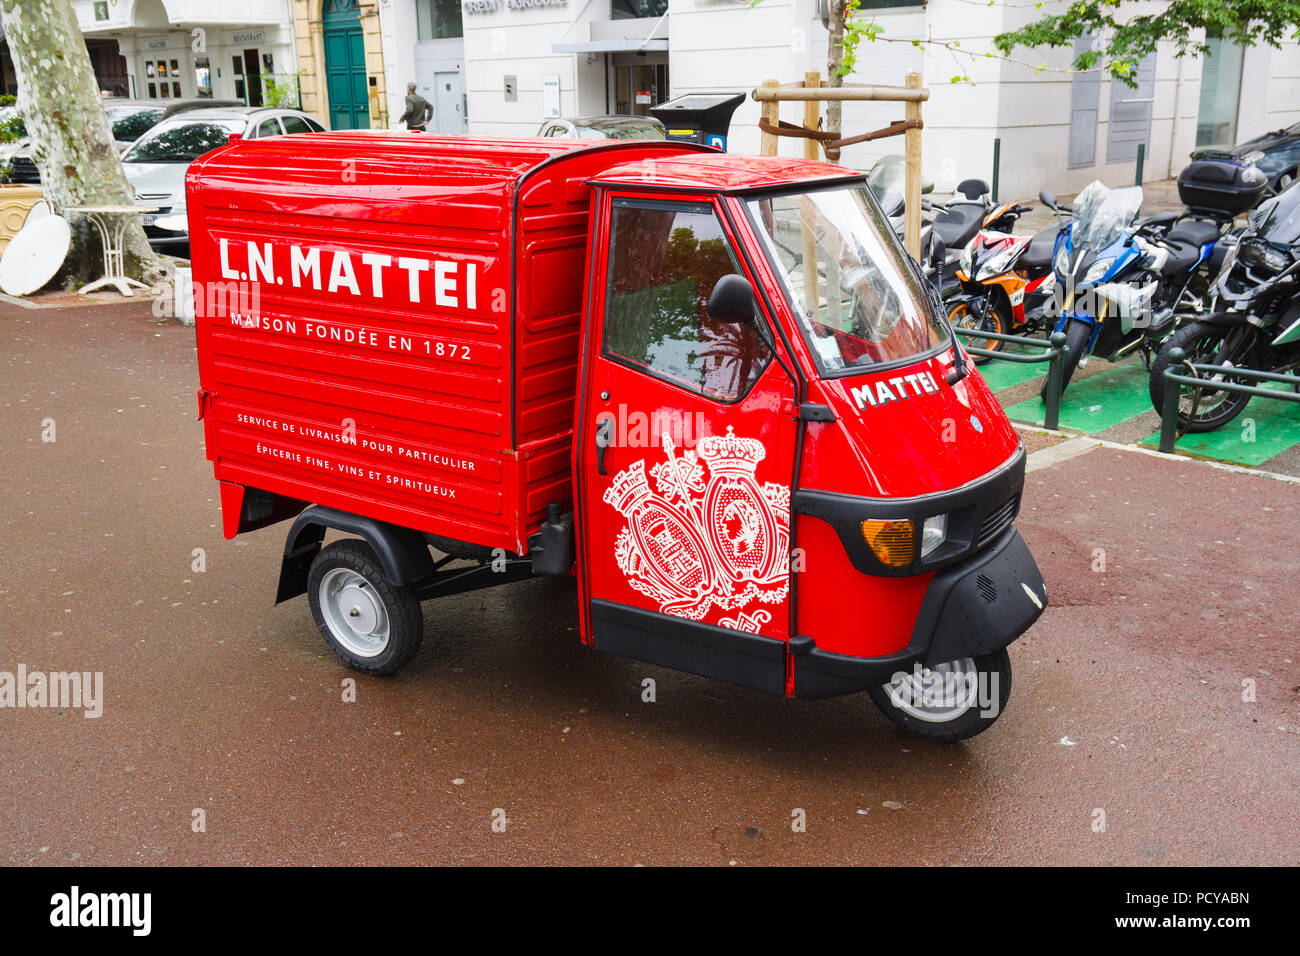 Piaggio Ape 50 three-wheeled vehicle used for deliveries by L.N. Mattei distillery in Bastia, Corsica, France Stock Photo